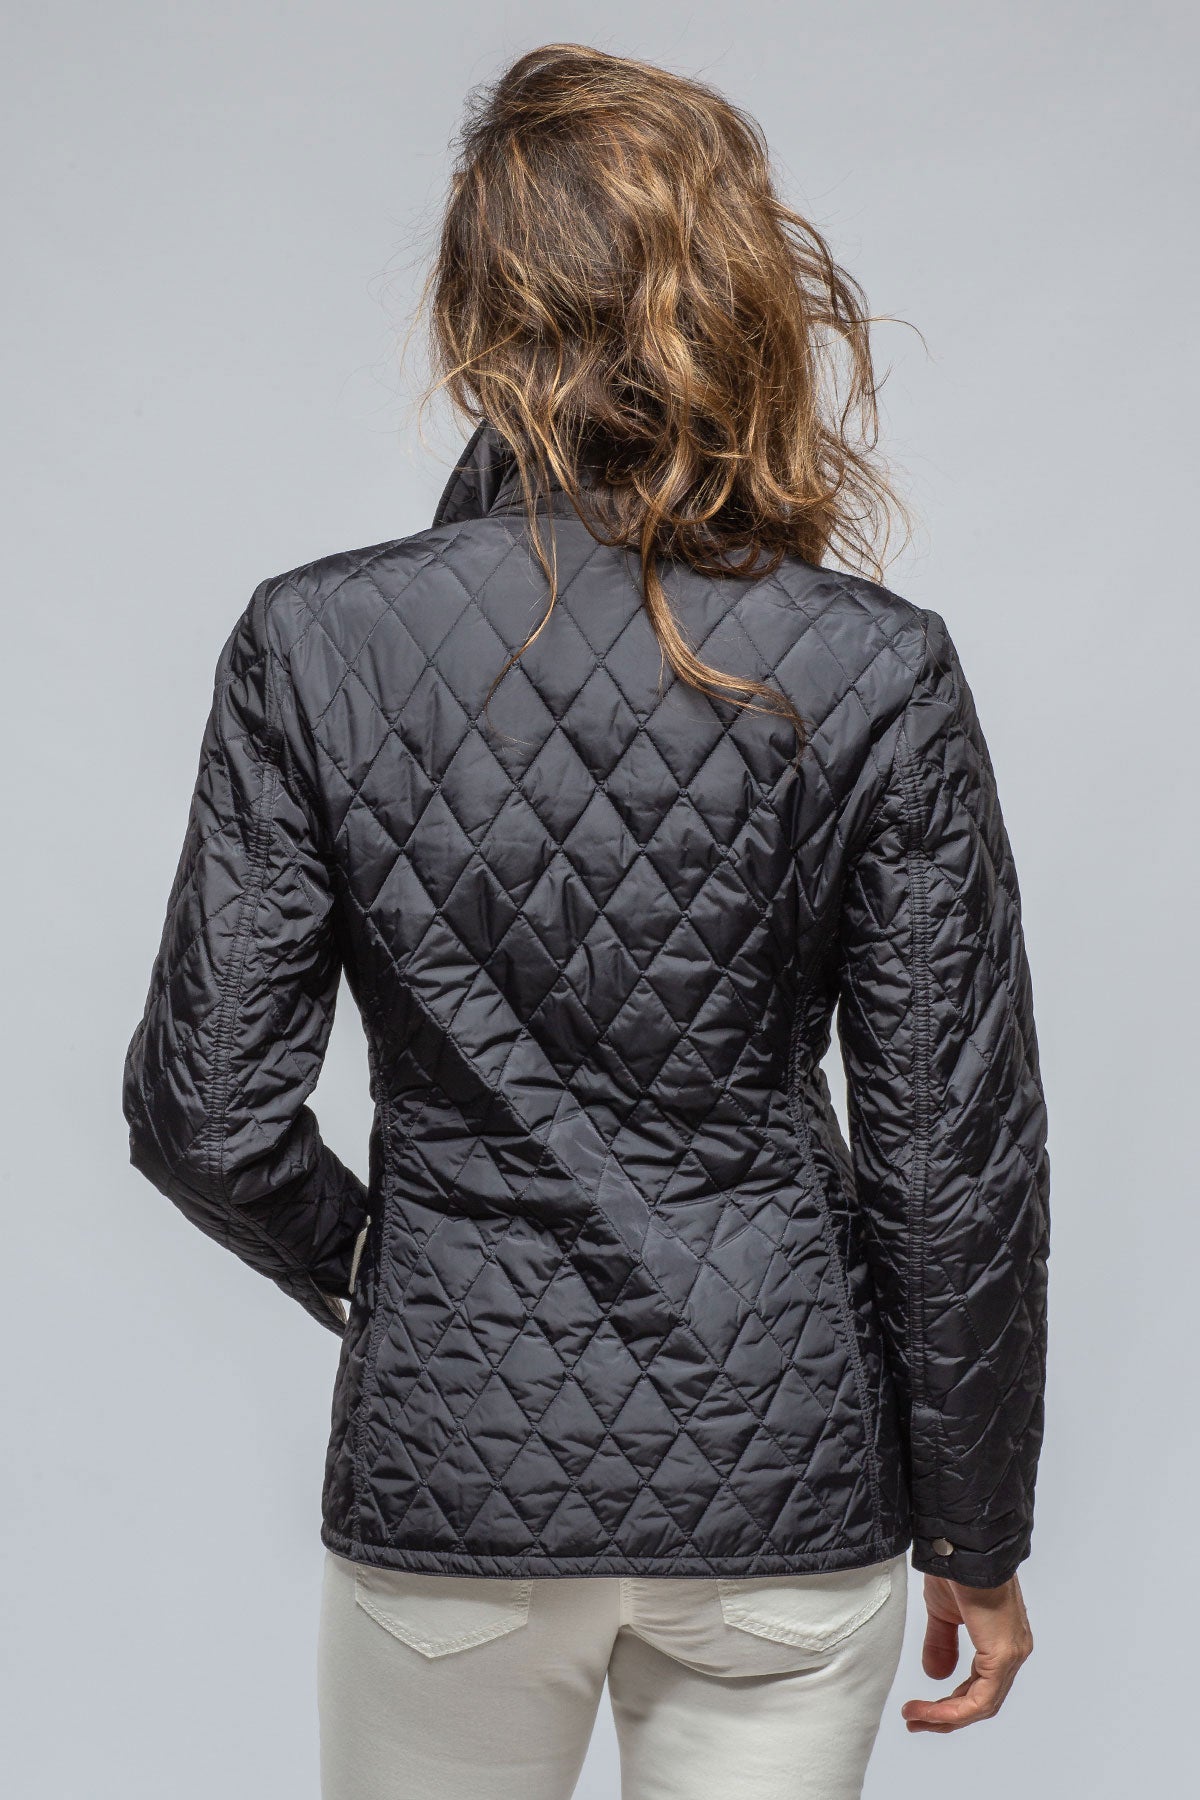 Melody Micro Puffer | Warehouse - Ladies - Outerwear - Lightweight | Gimo's